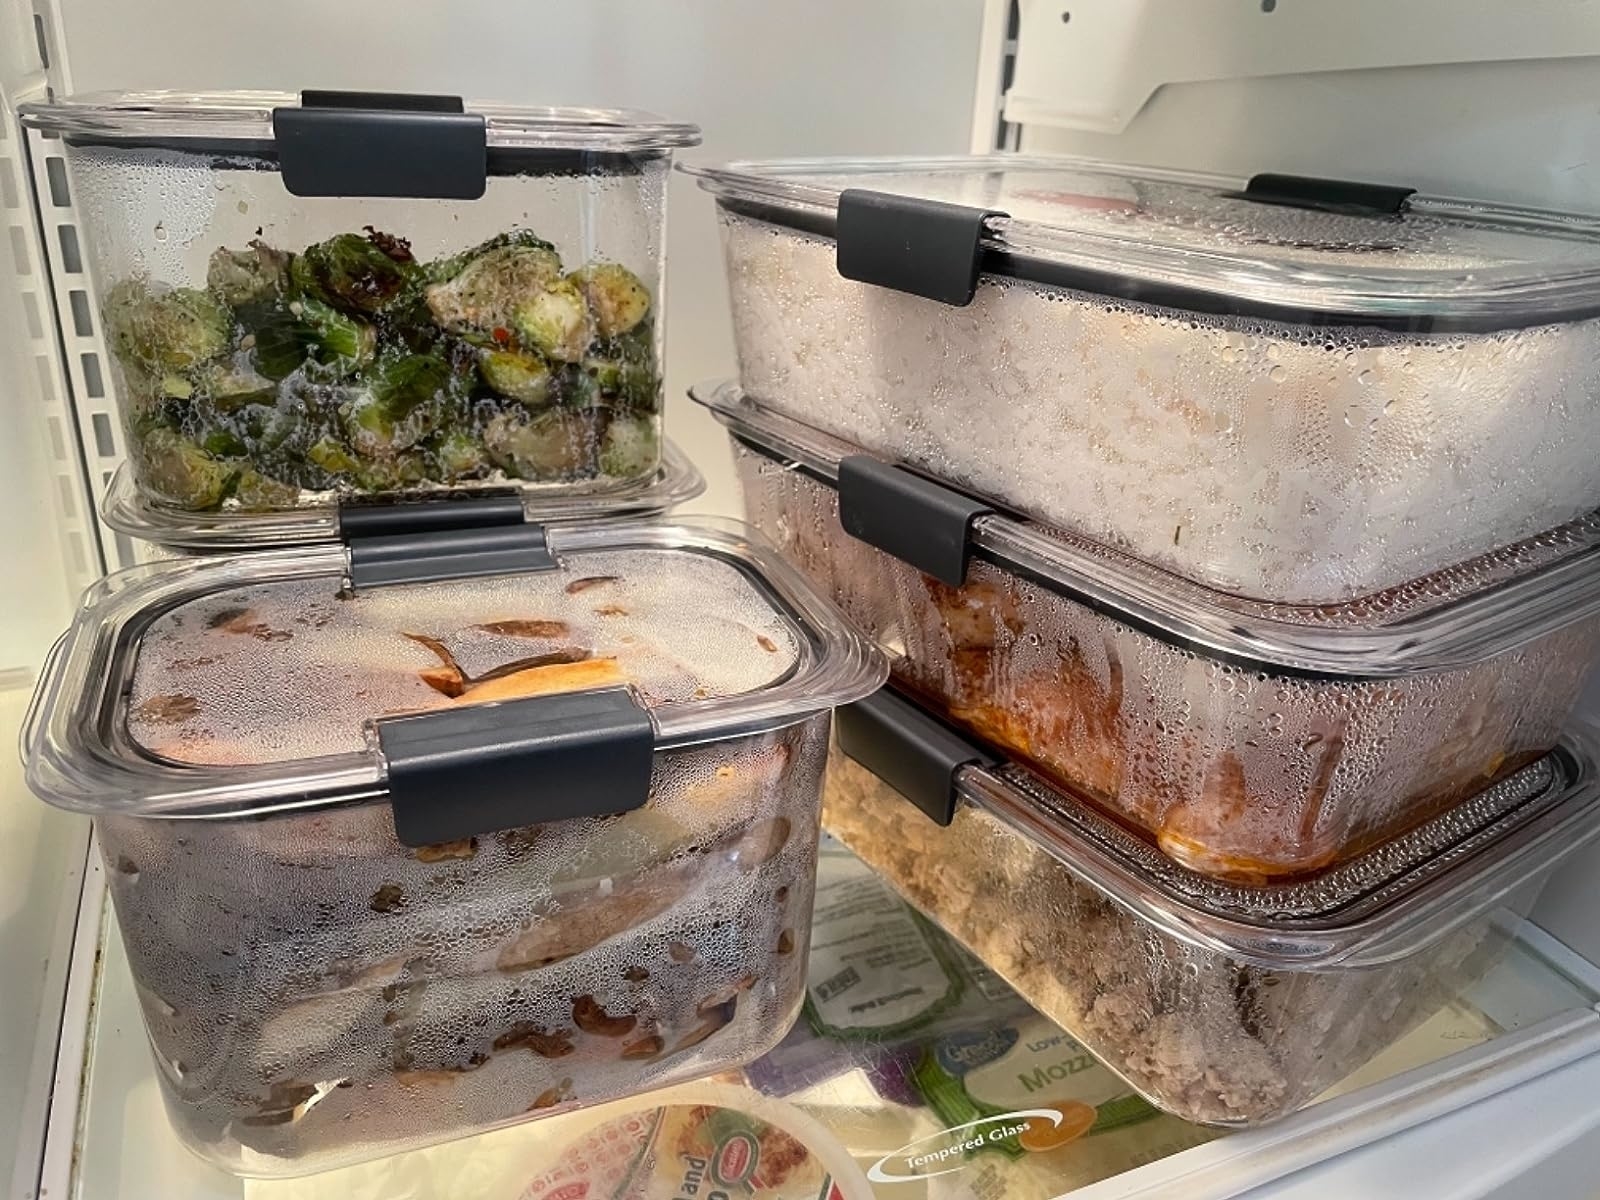 Reviewer image of the containers filled with food in their fridge